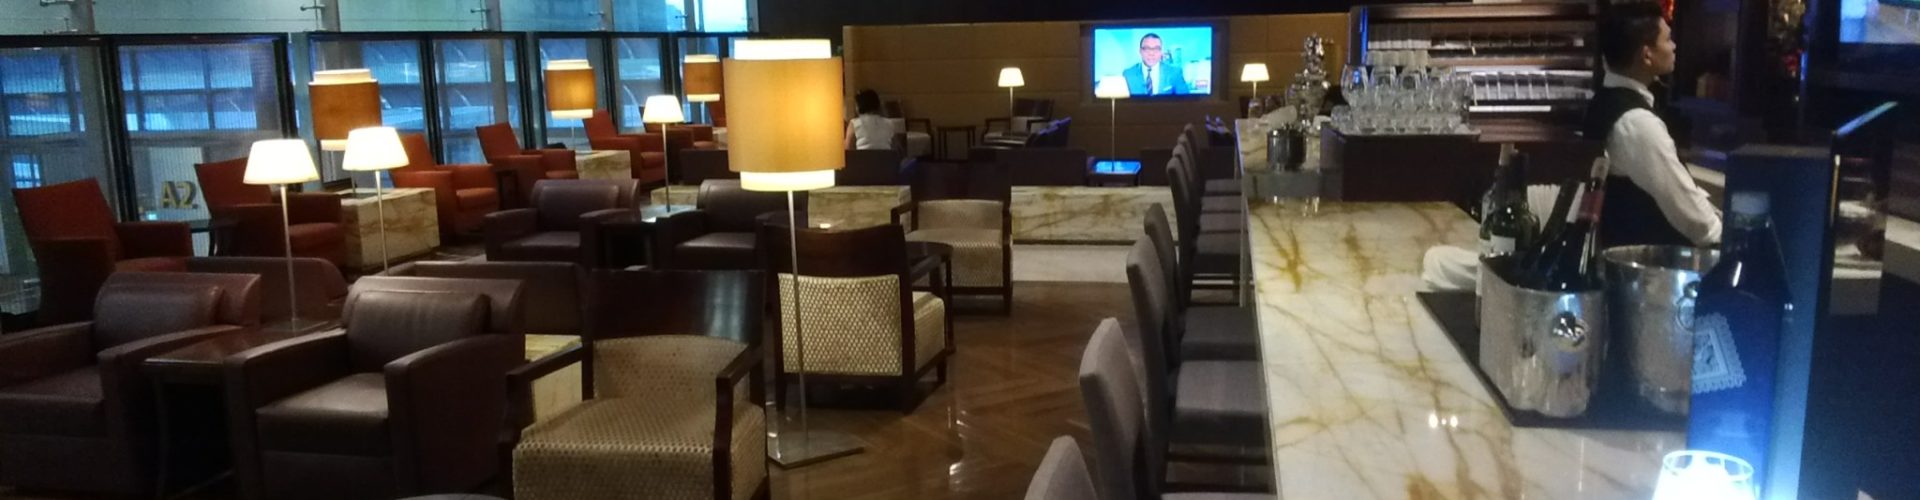 Lounge Review: Singapore Airlines SilverKris First Class Lounge